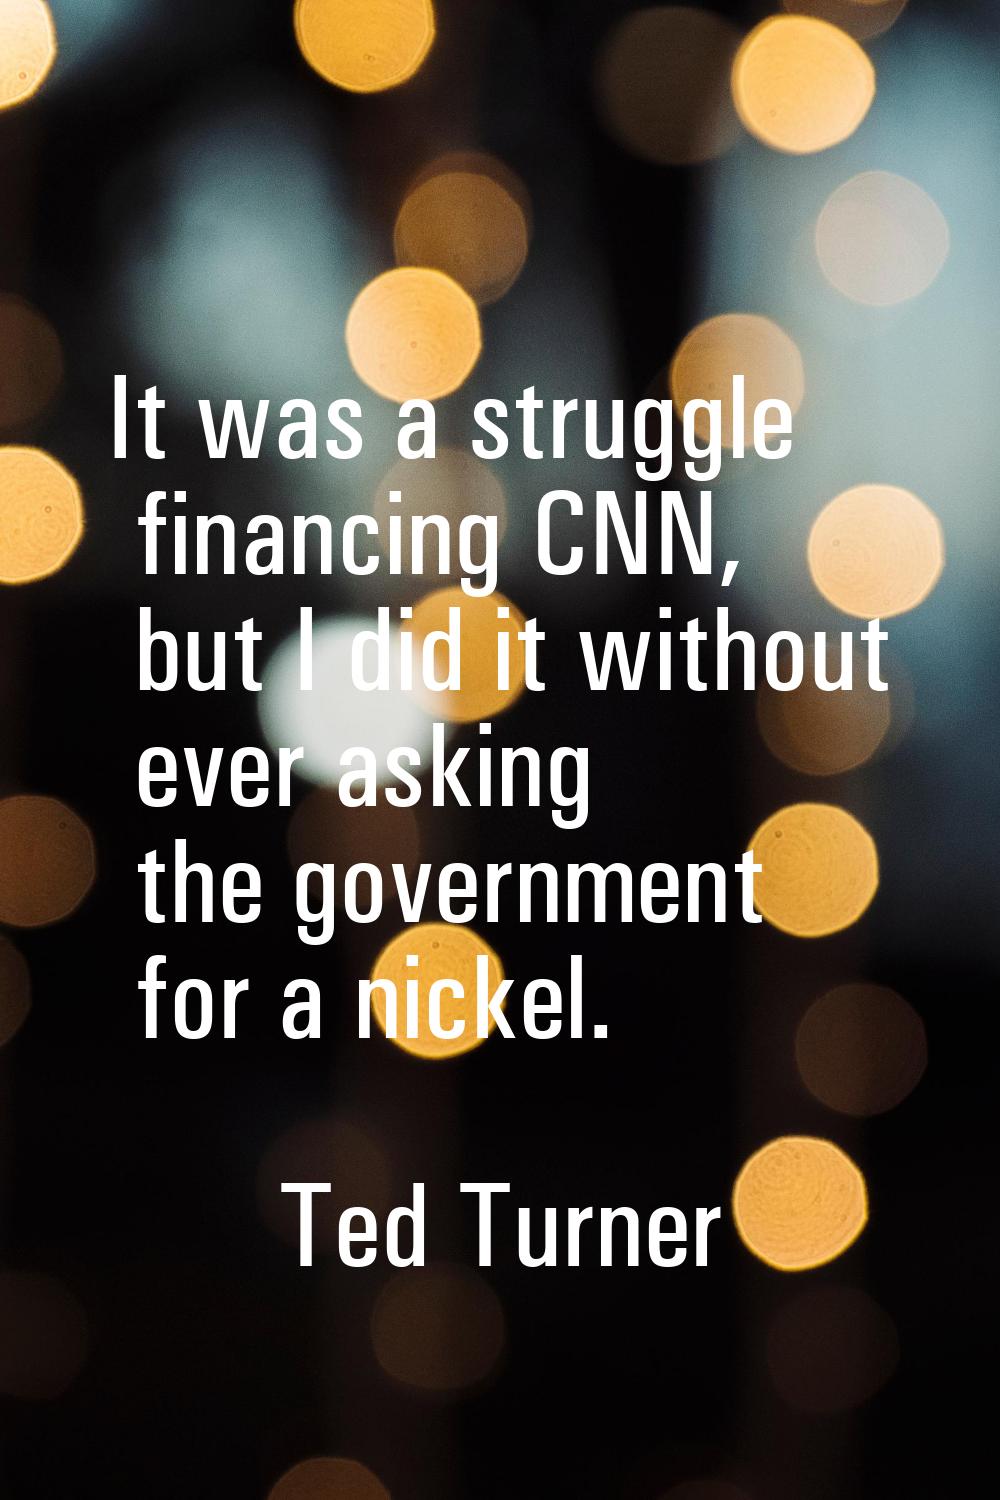 It was a struggle financing CNN, but I did it without ever asking the government for a nickel.